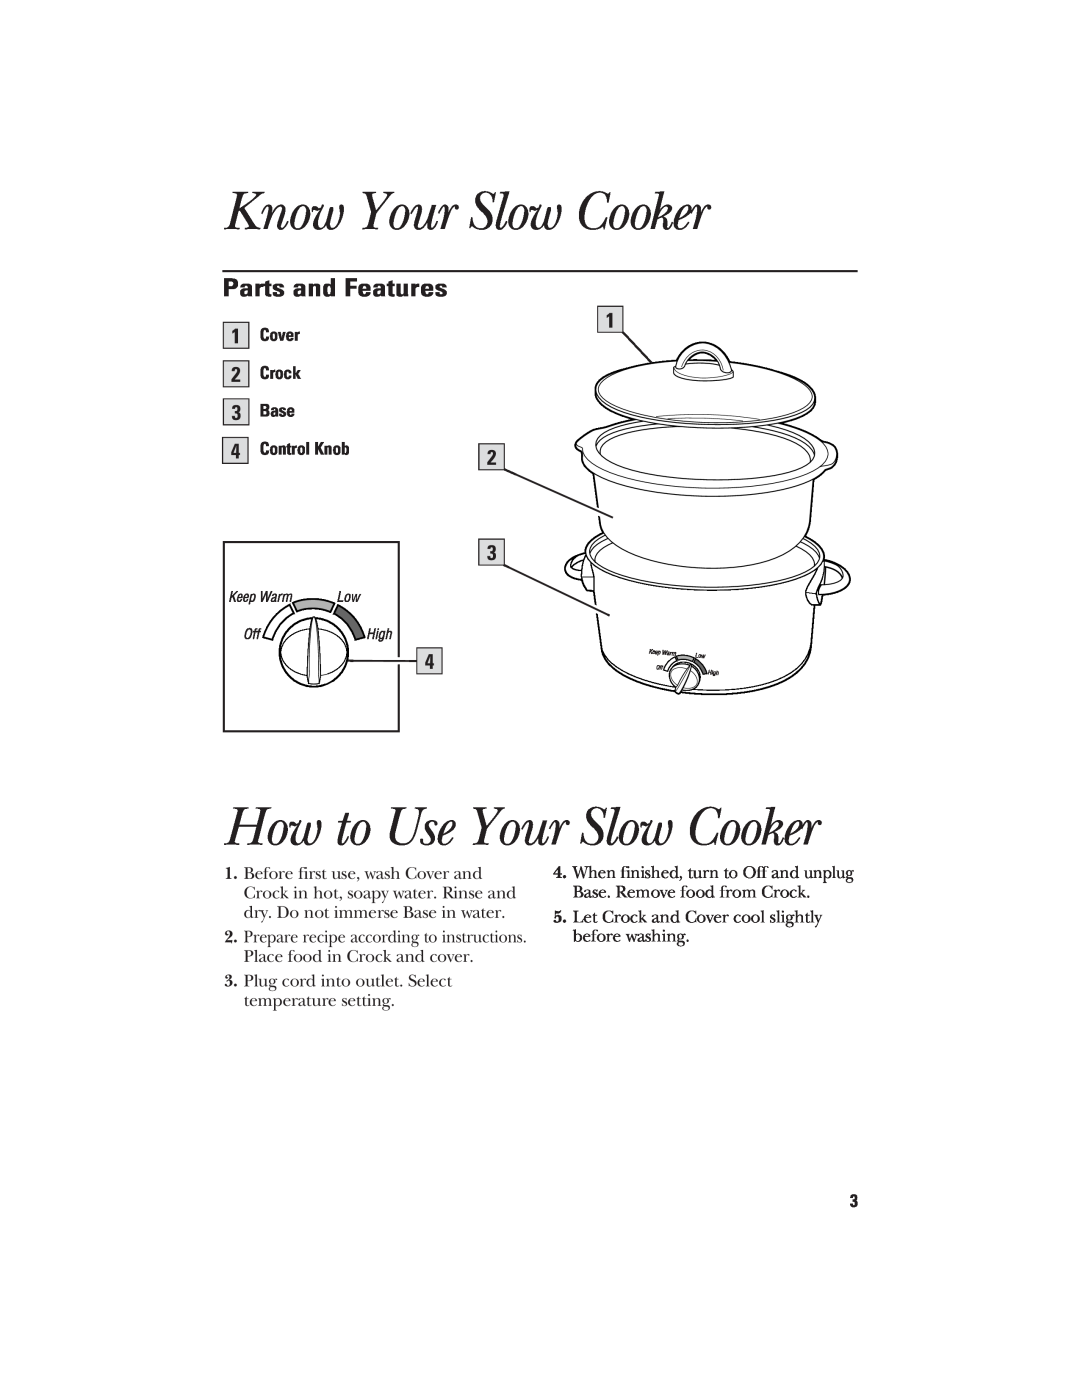 GE 840070700 Know Your Slow Cooker, How to Use Your Slow Cooker, Parts and Features, Cover 2 Crock 3 Base 4 Control Knob 